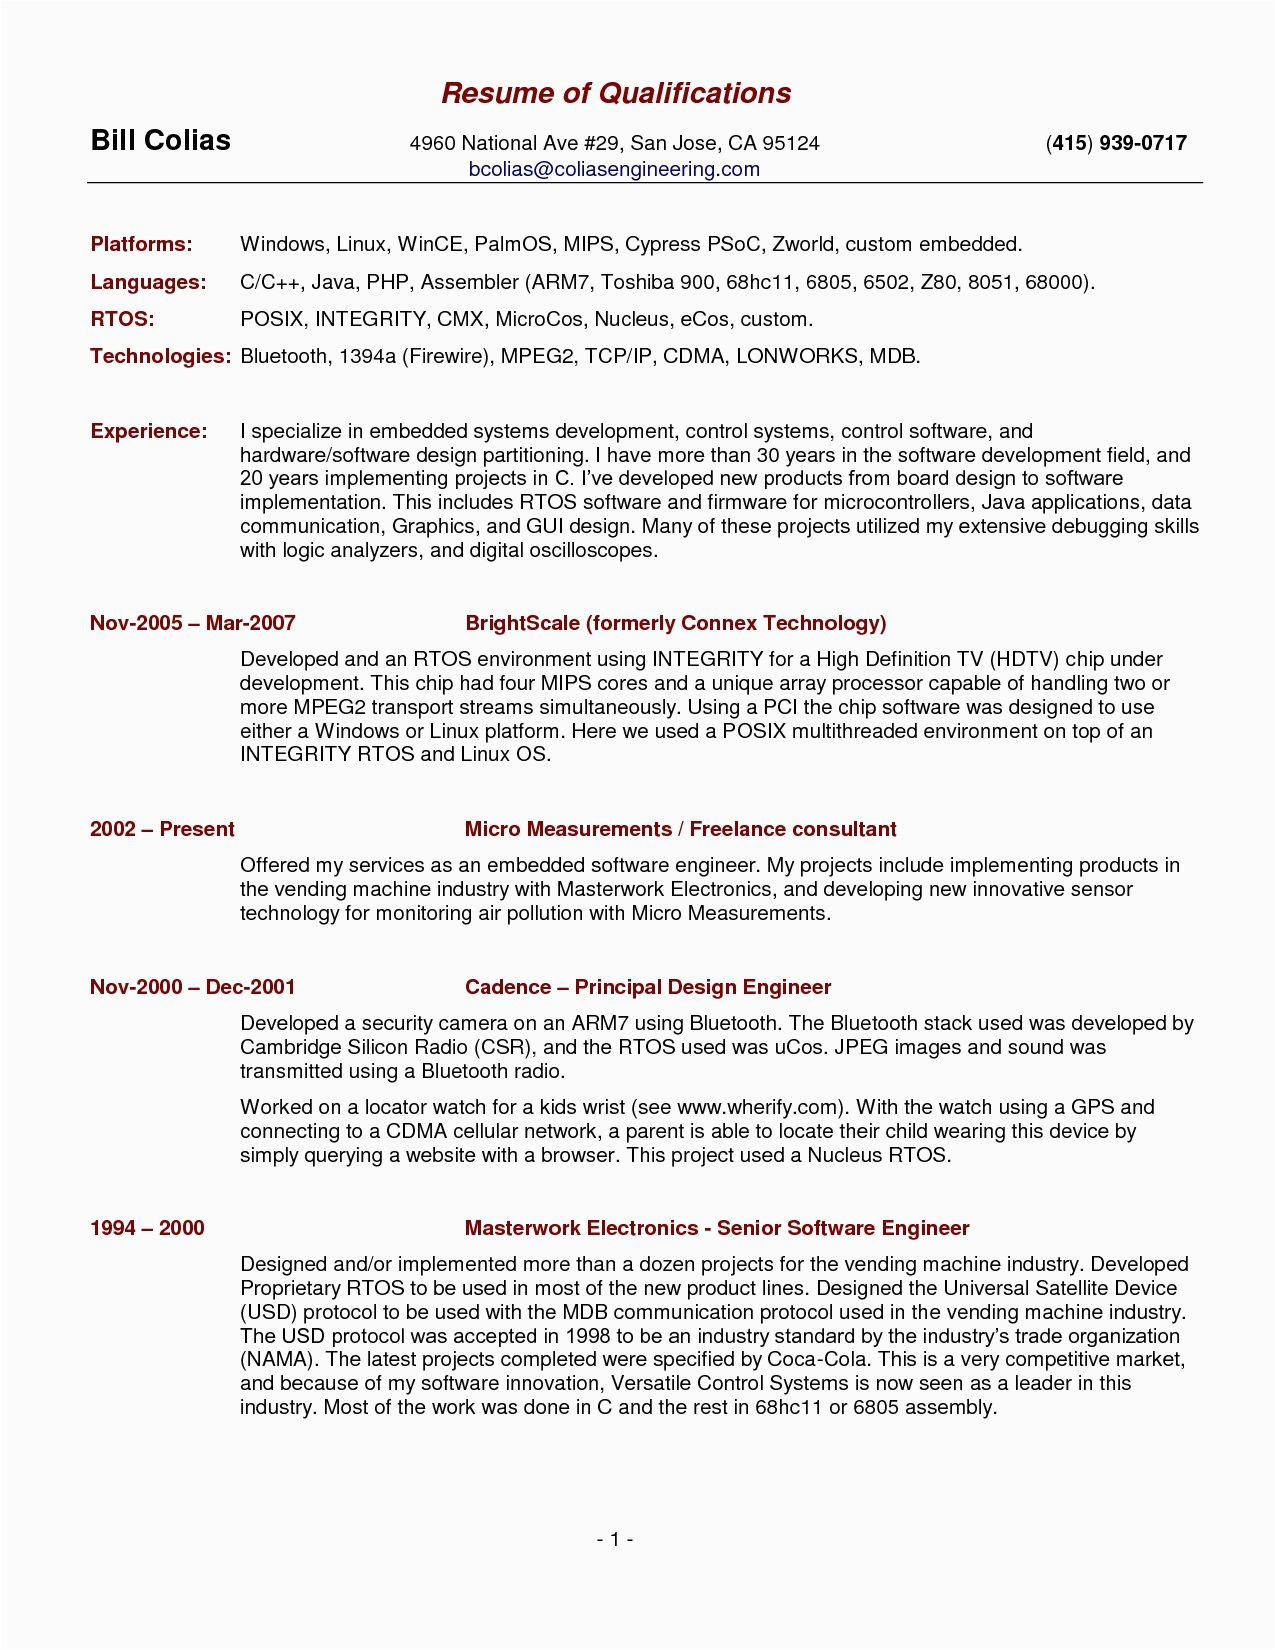 Resume Sample with Qualifications and Skills Qualifications for A Resume Examples 7f8ea3a2a New Resume Skills and